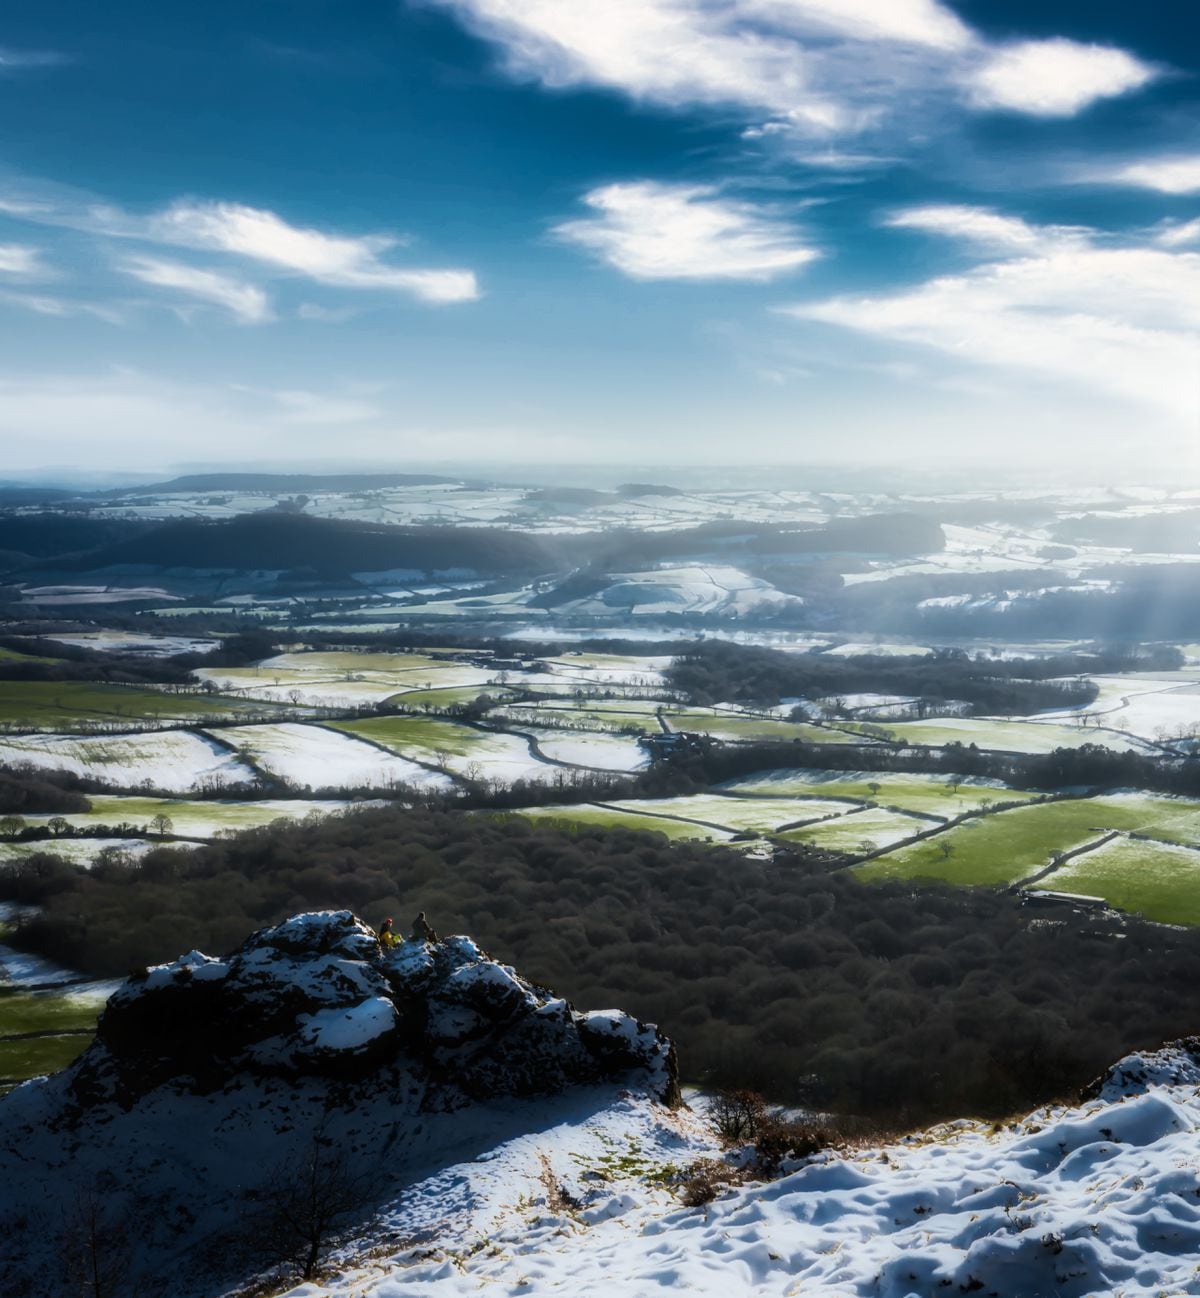 Wintry views from The Wrekin. Pic: Aaron Collyer (Shutter C Photography)